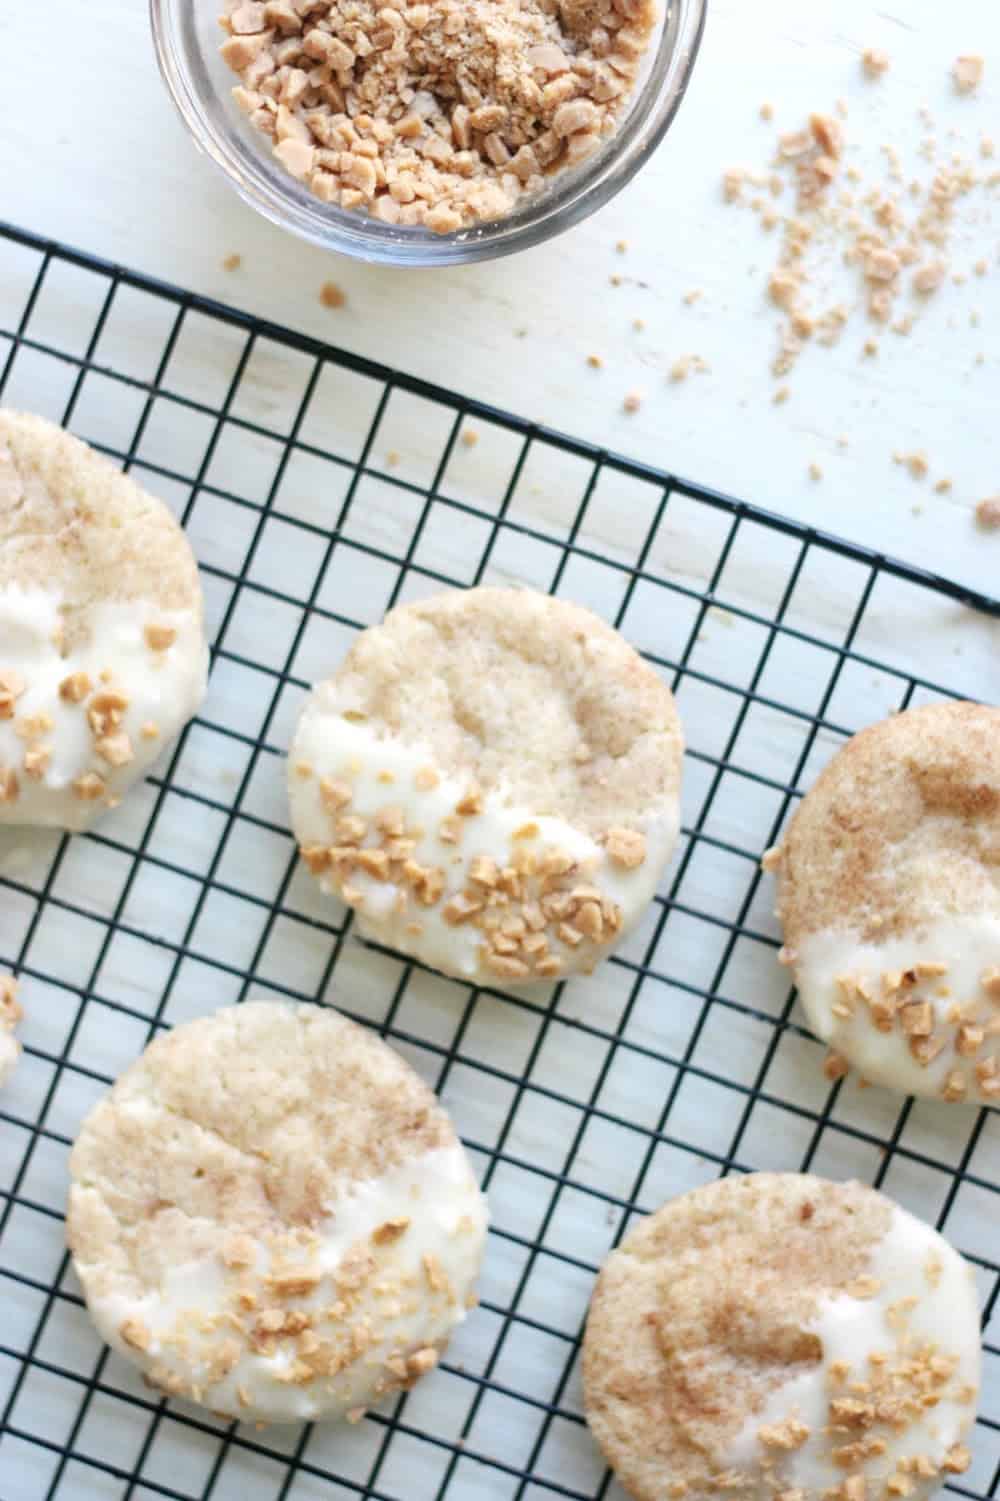 Toffee sprinkled onto white chocolate snickerdoodles